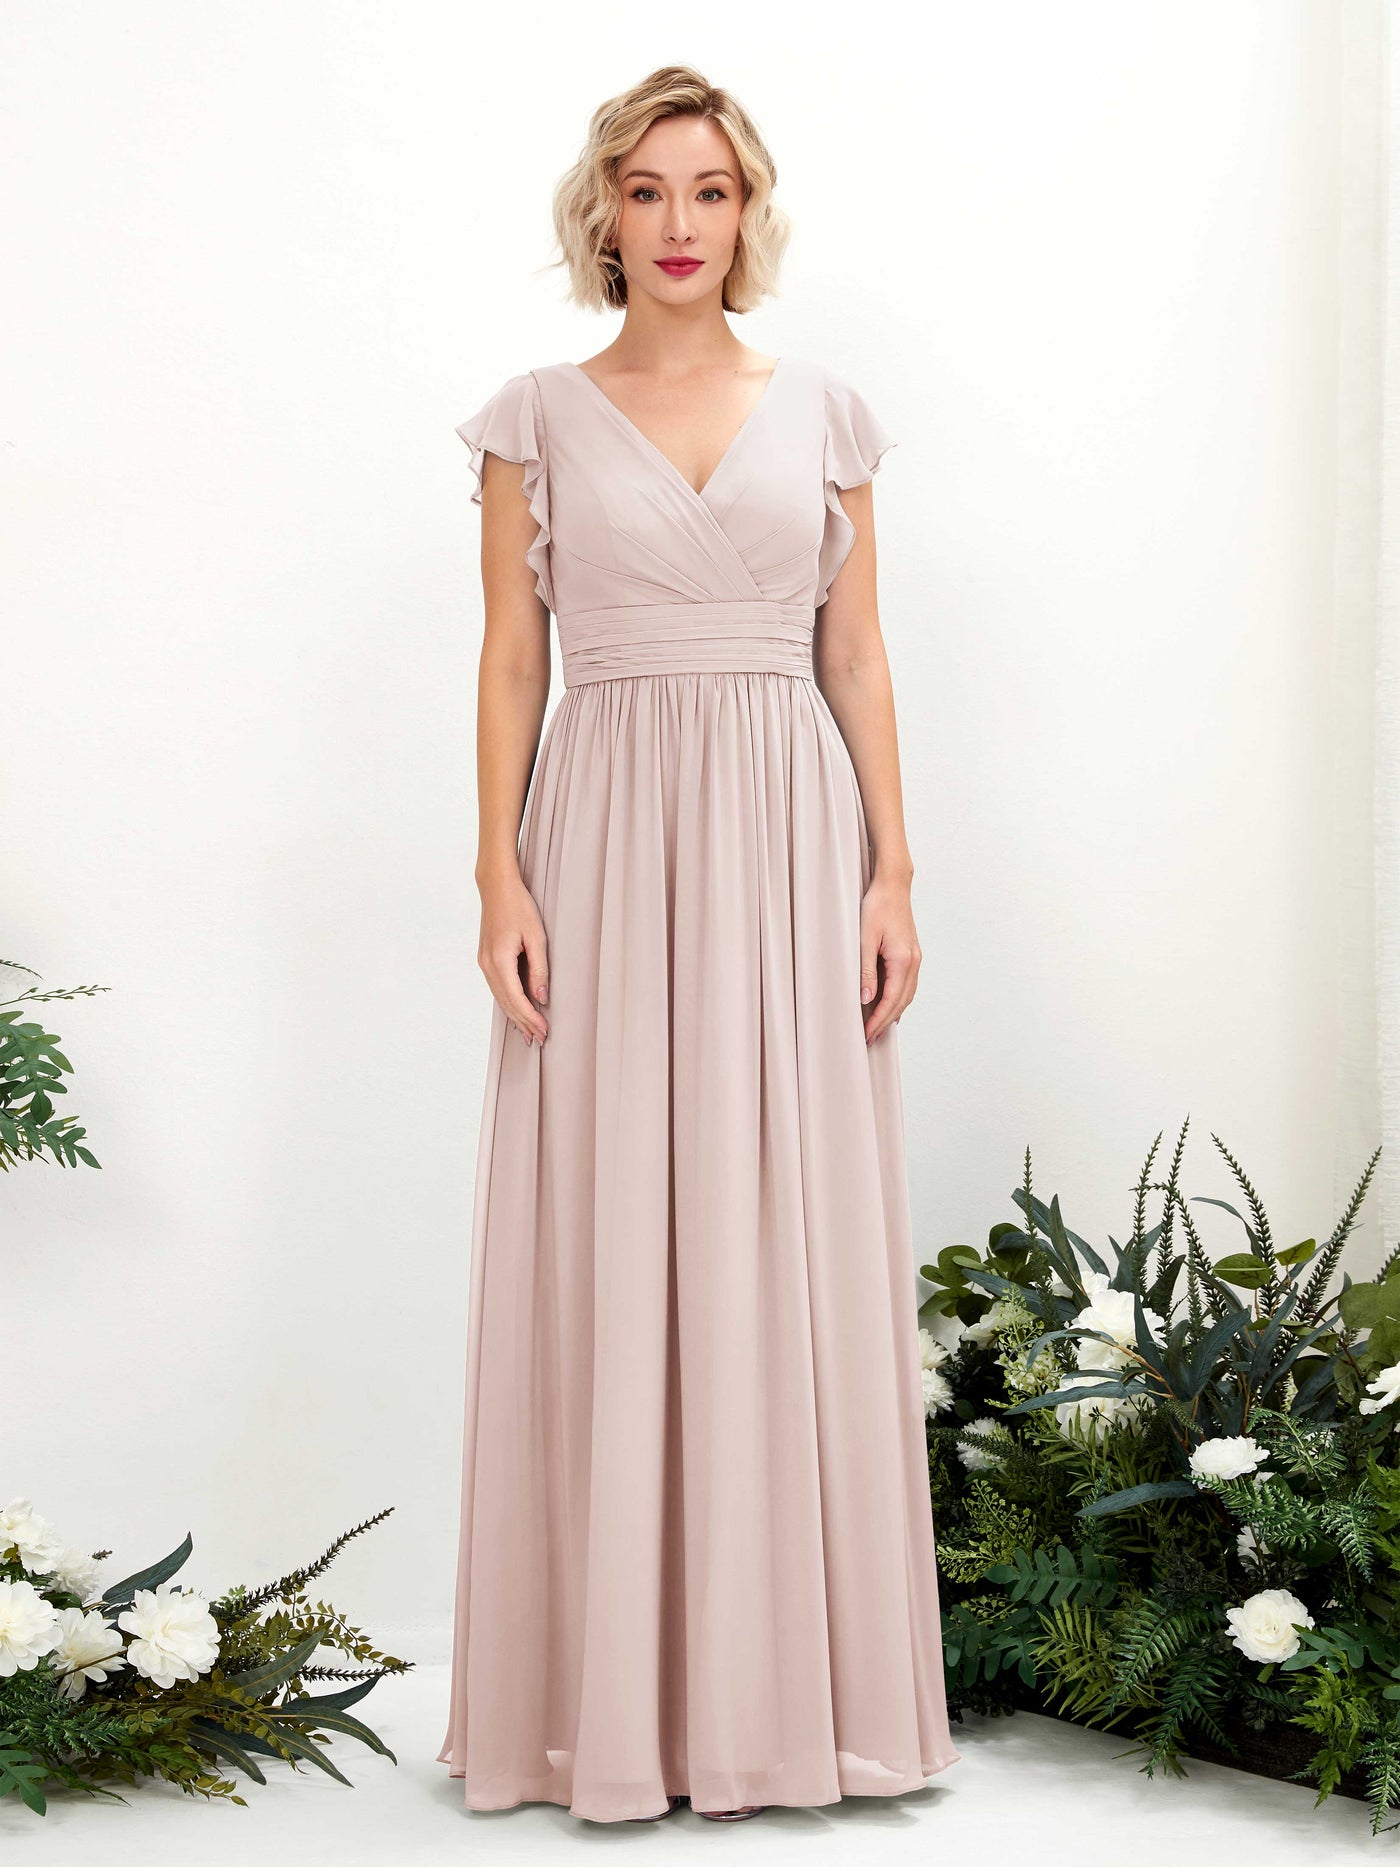 Biscotti Bridesmaid Dresses Bridesmaid Dress A-line Chiffon V-neck Full Length Short Sleeves Wedding Party Dress (81222735)#color_biscotti